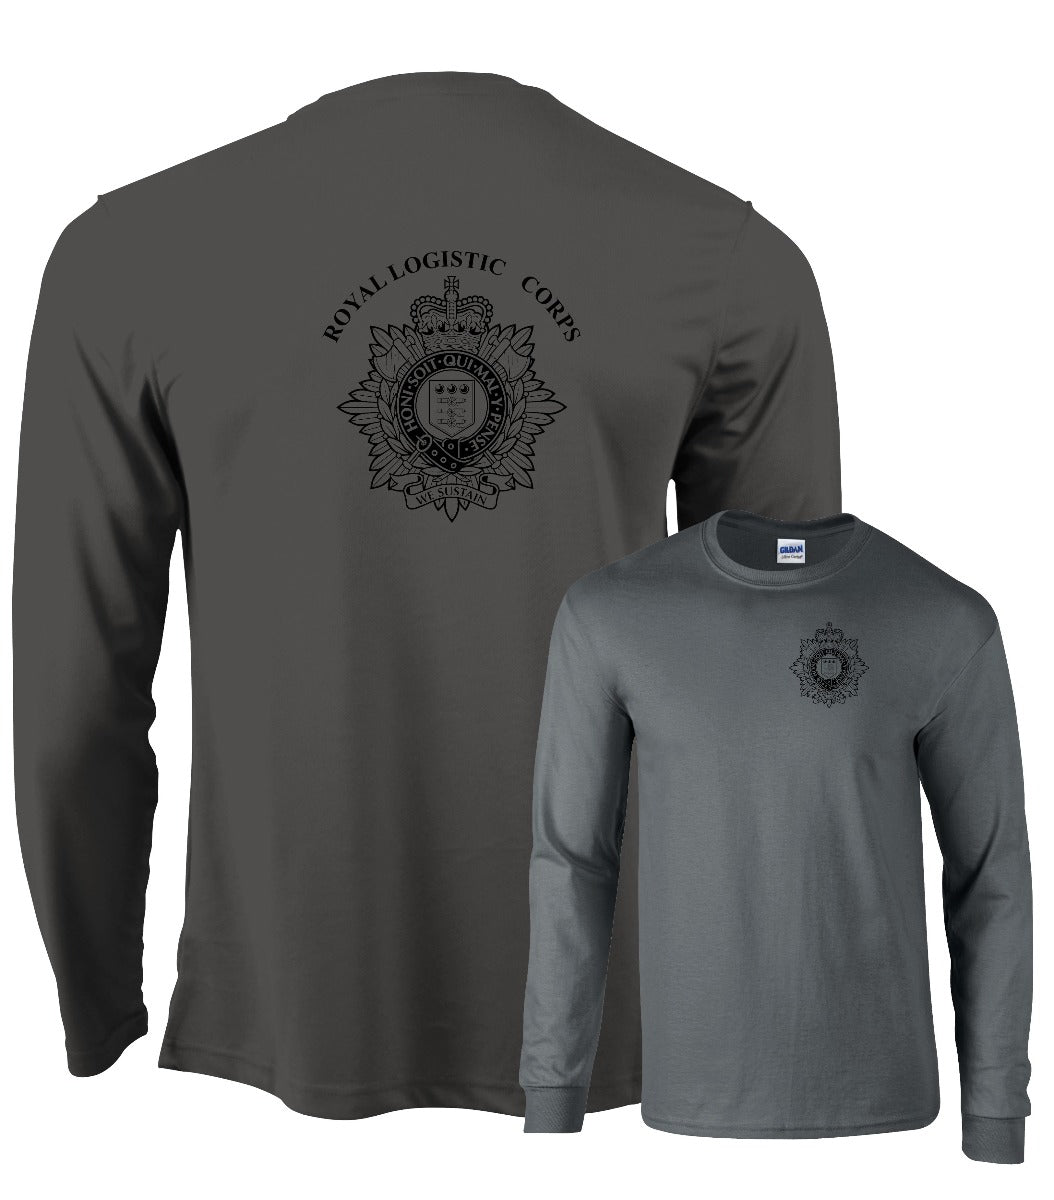 Double Printed Royal Logistic Corps Long sleeve Wicking T-Shirt